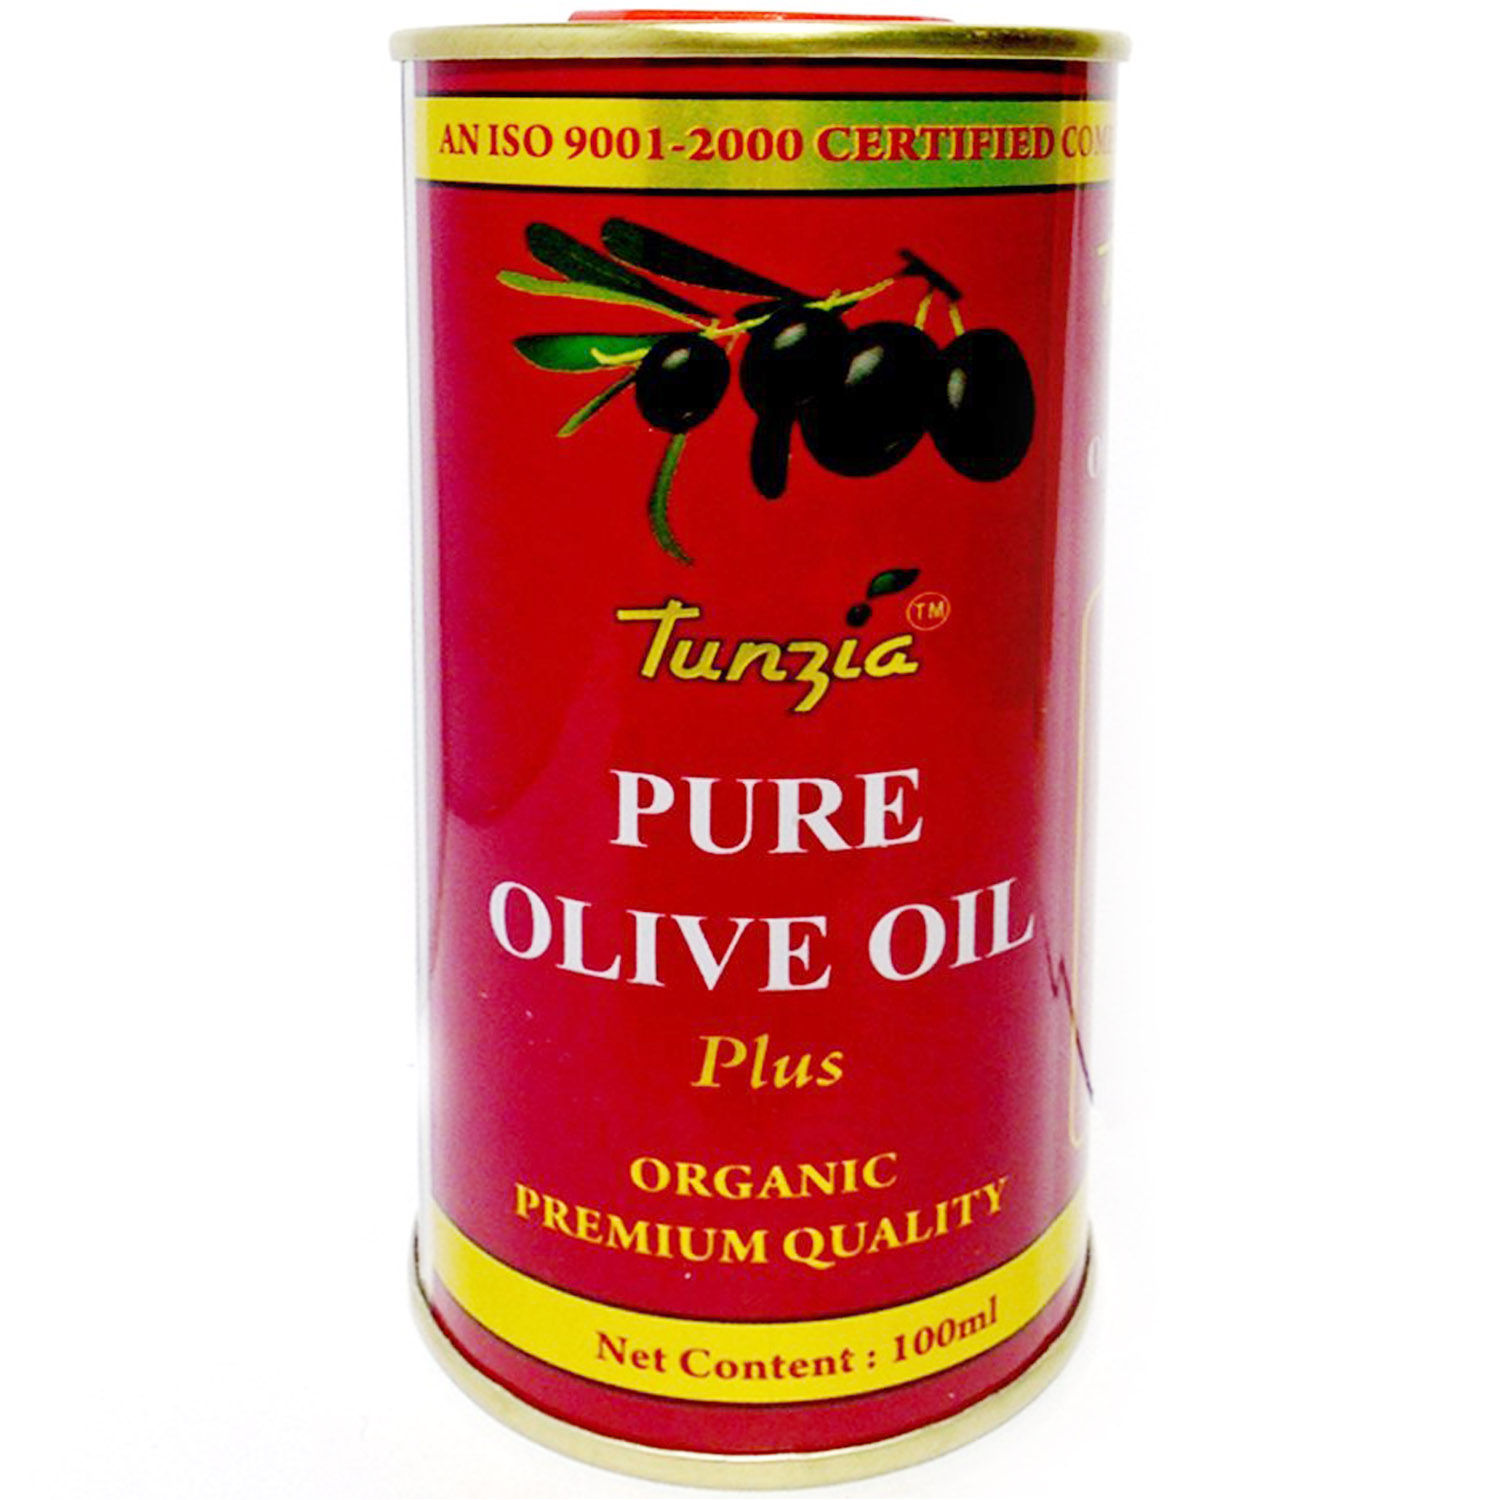 Tunzia Pure Olive Oil, 100 ml, Pack of 1 